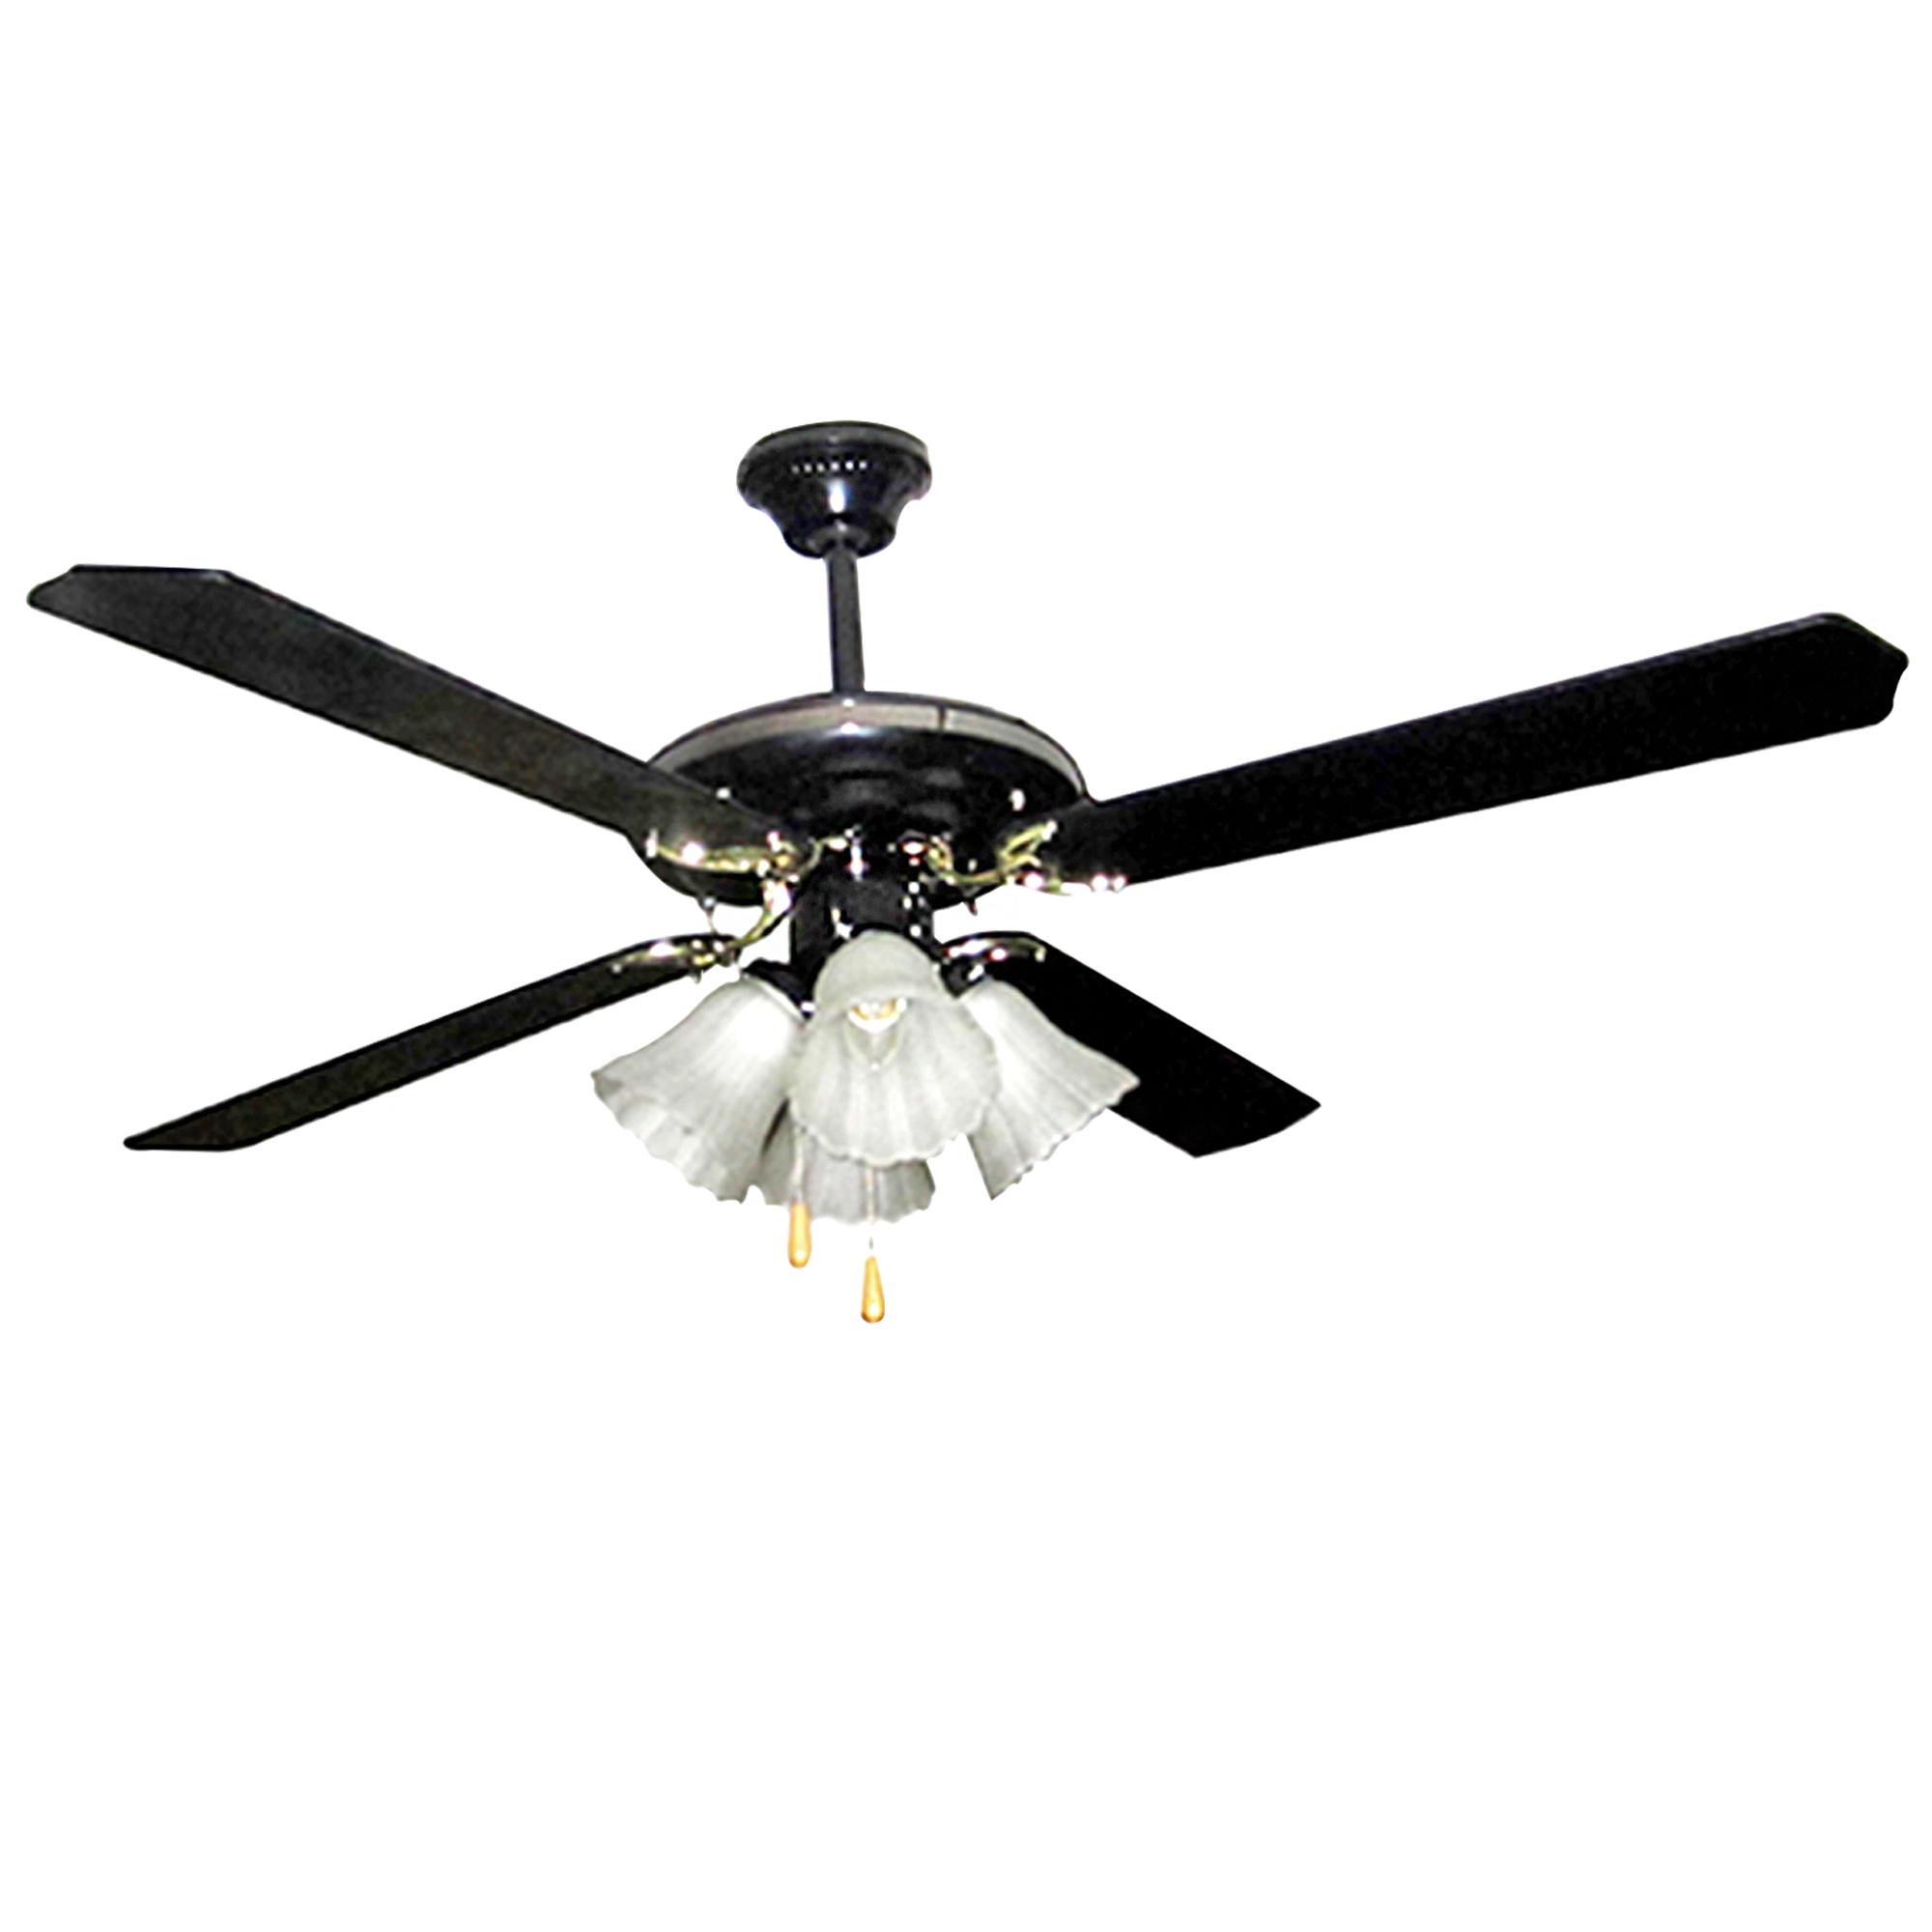 American Star Decorative Ceiling Fan 52 With 4 Blades And 4 Lights